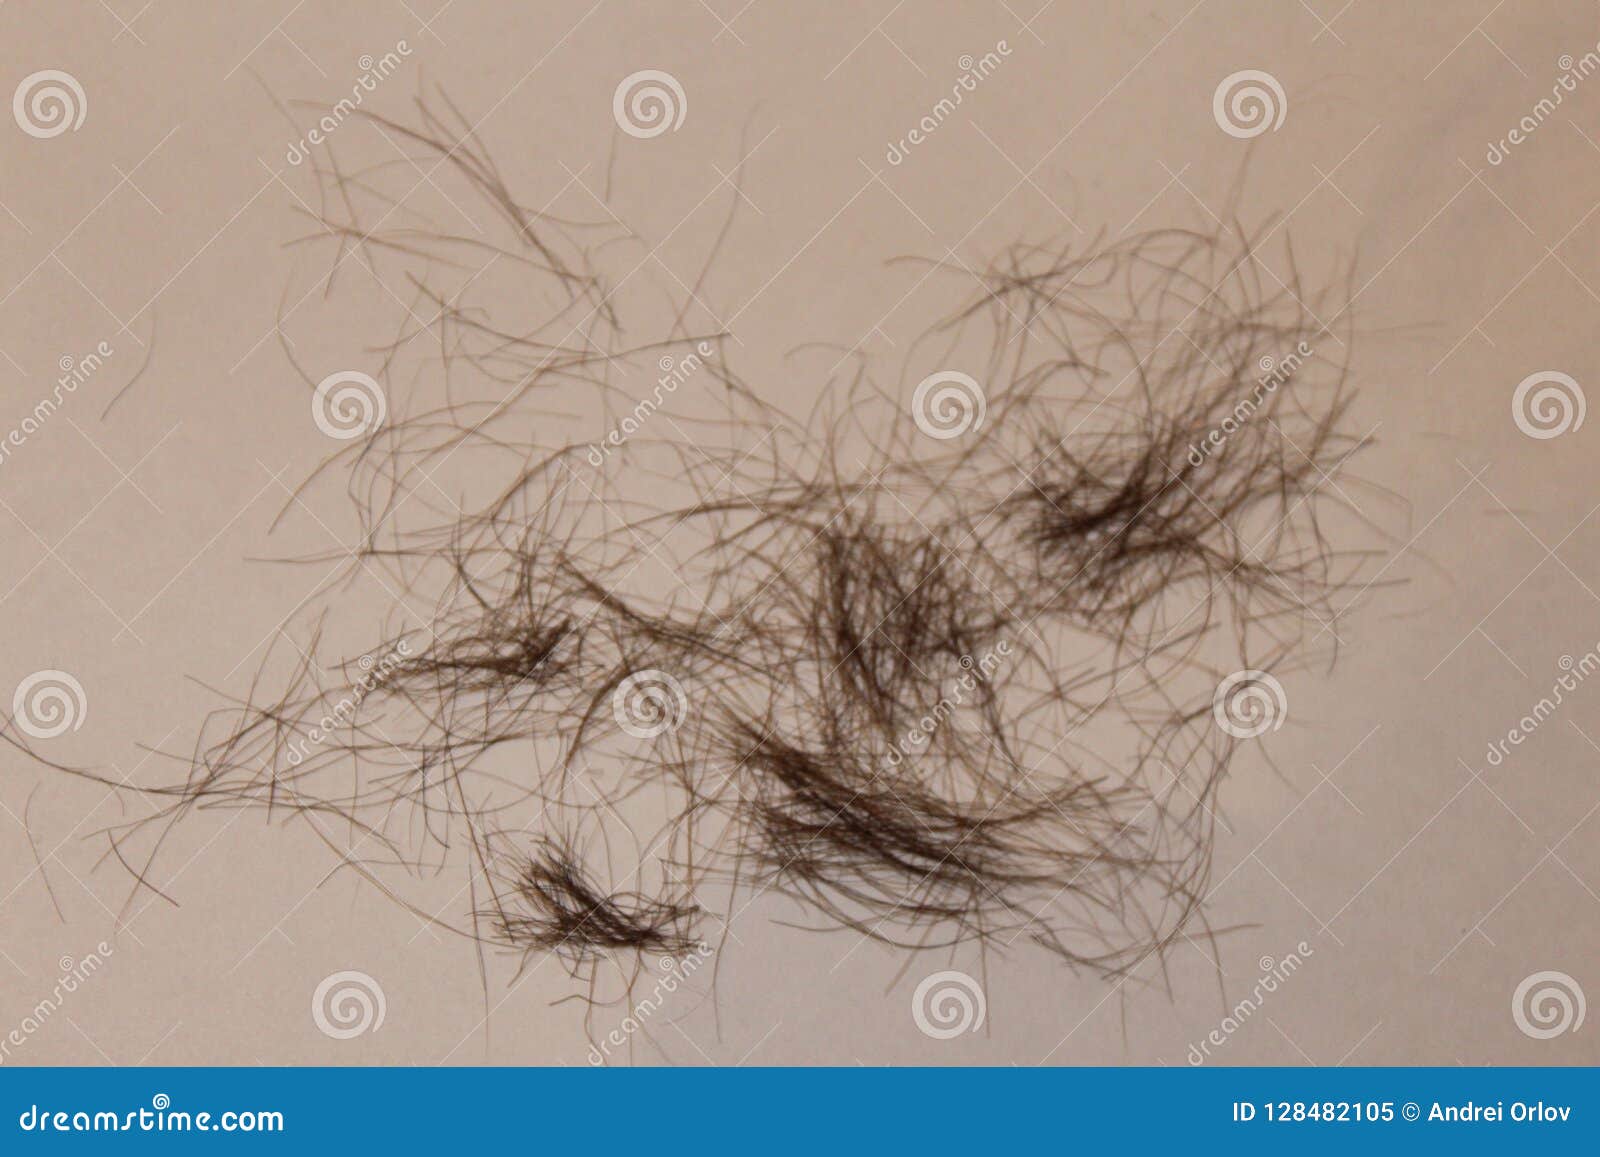 Pubic Hair from the Groin on a White Sheet Stock Image - Image of white,  sheet: 128482105